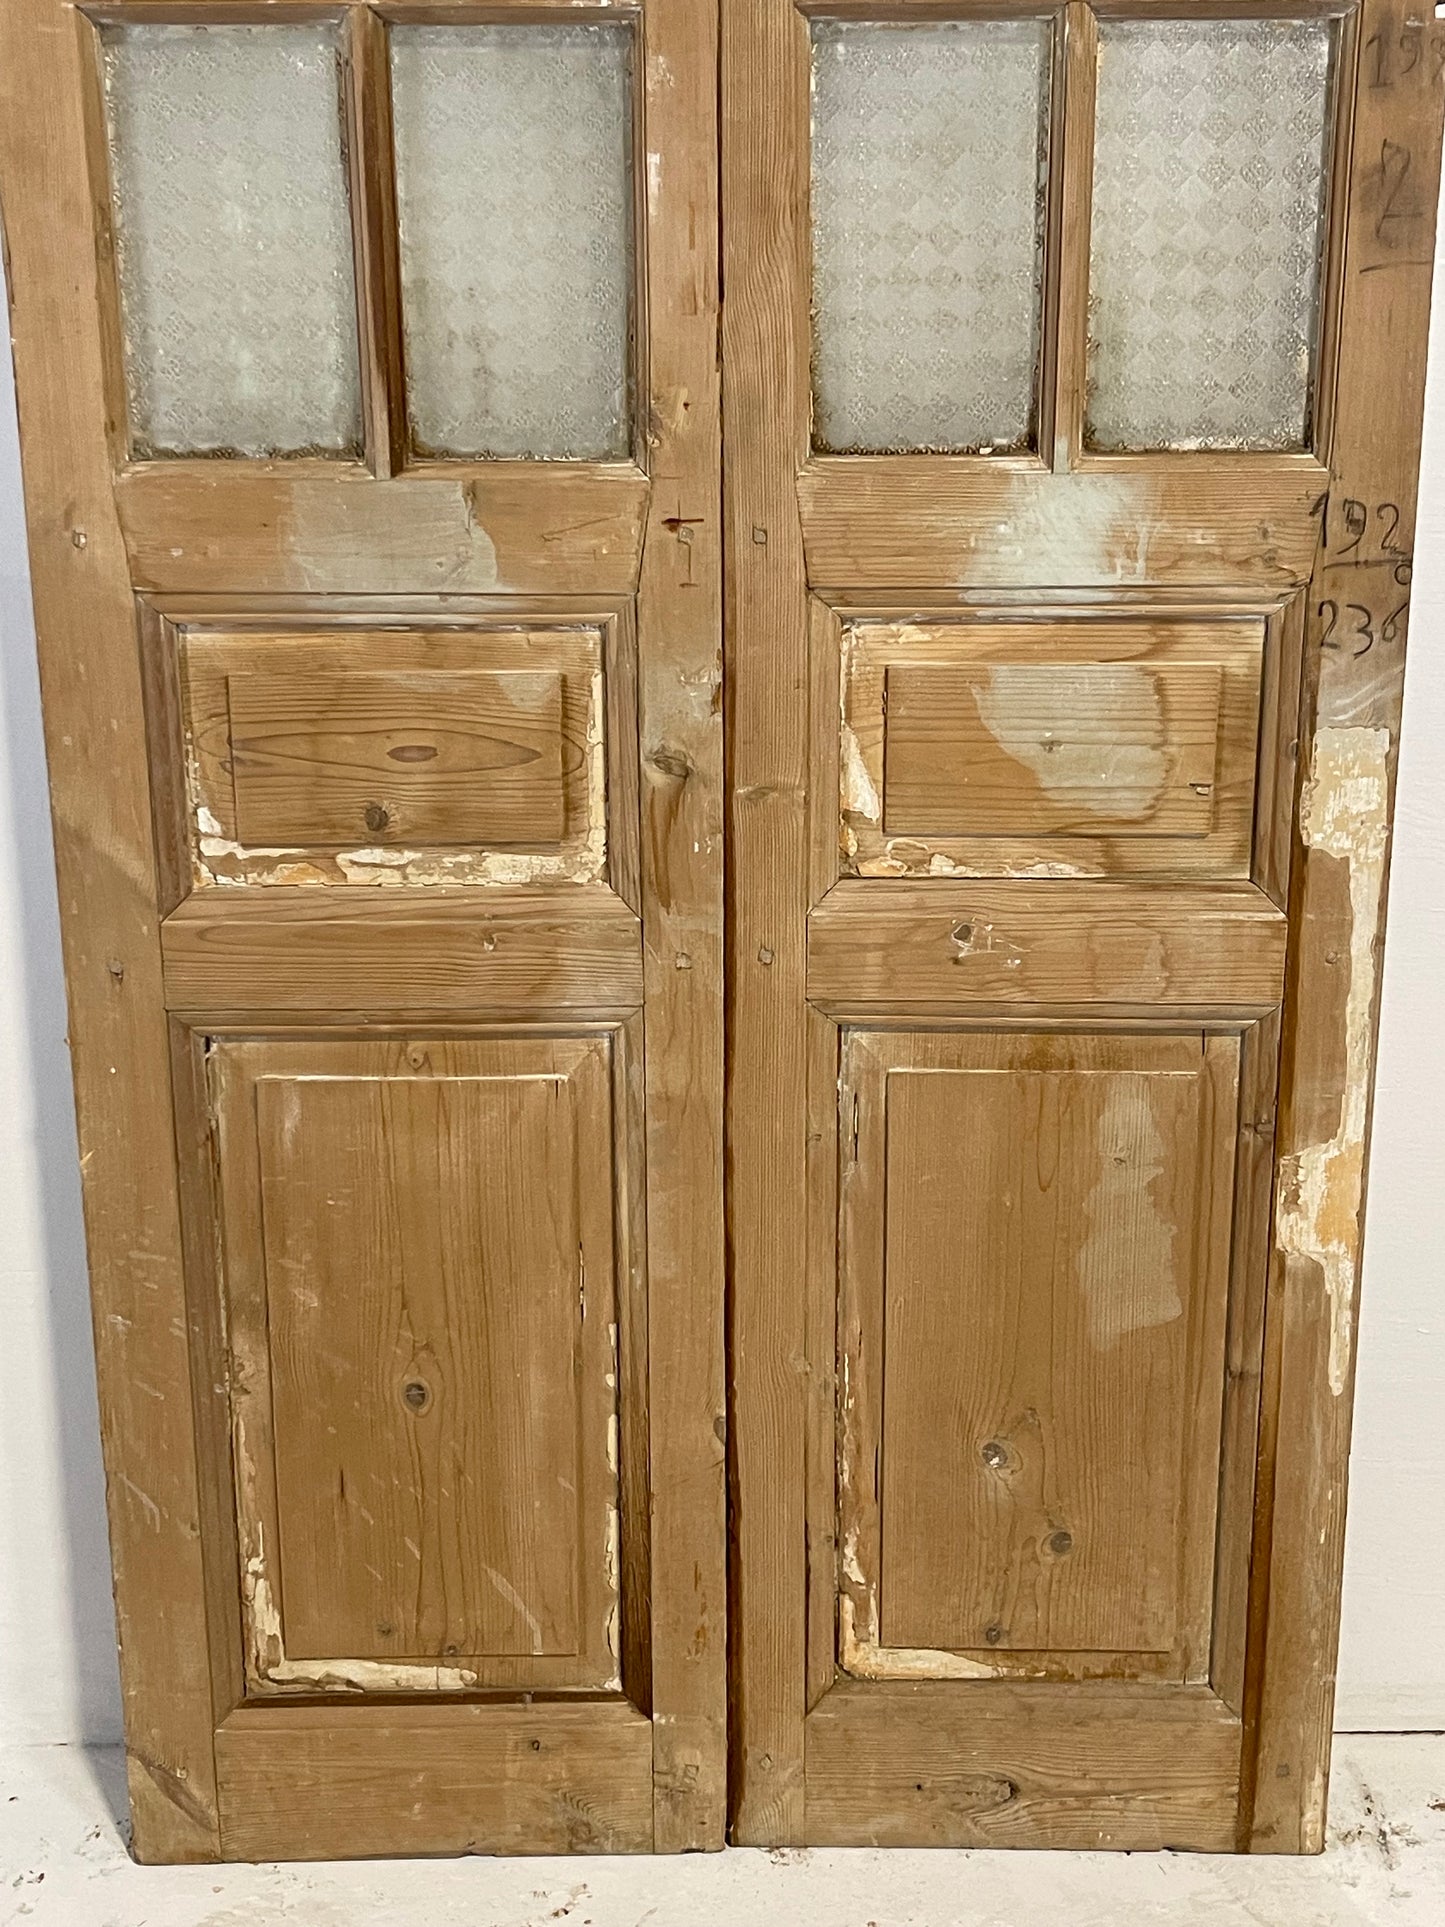 Antique French panel doors with glass (93.25x37.5) L198